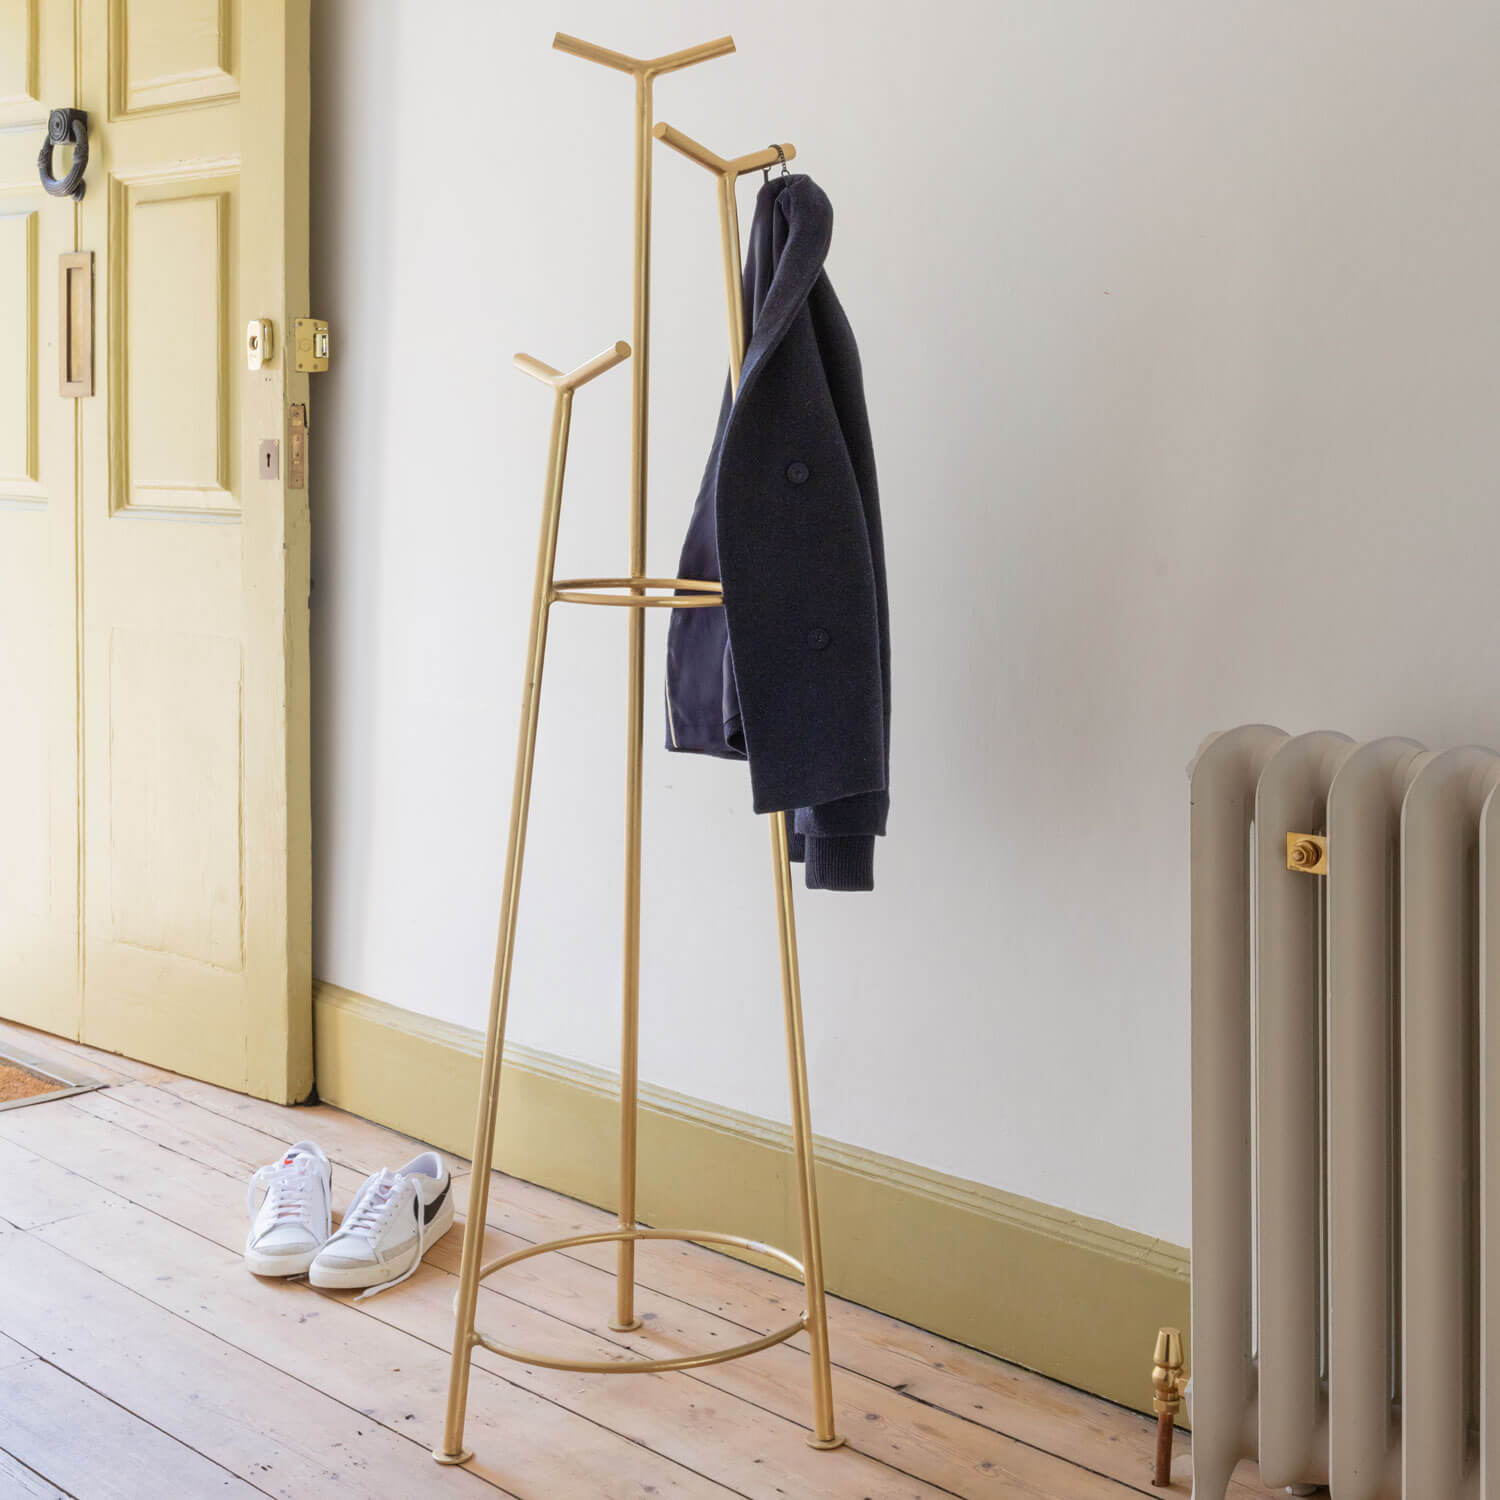 Read more about Graham and green milton tiered coat stand